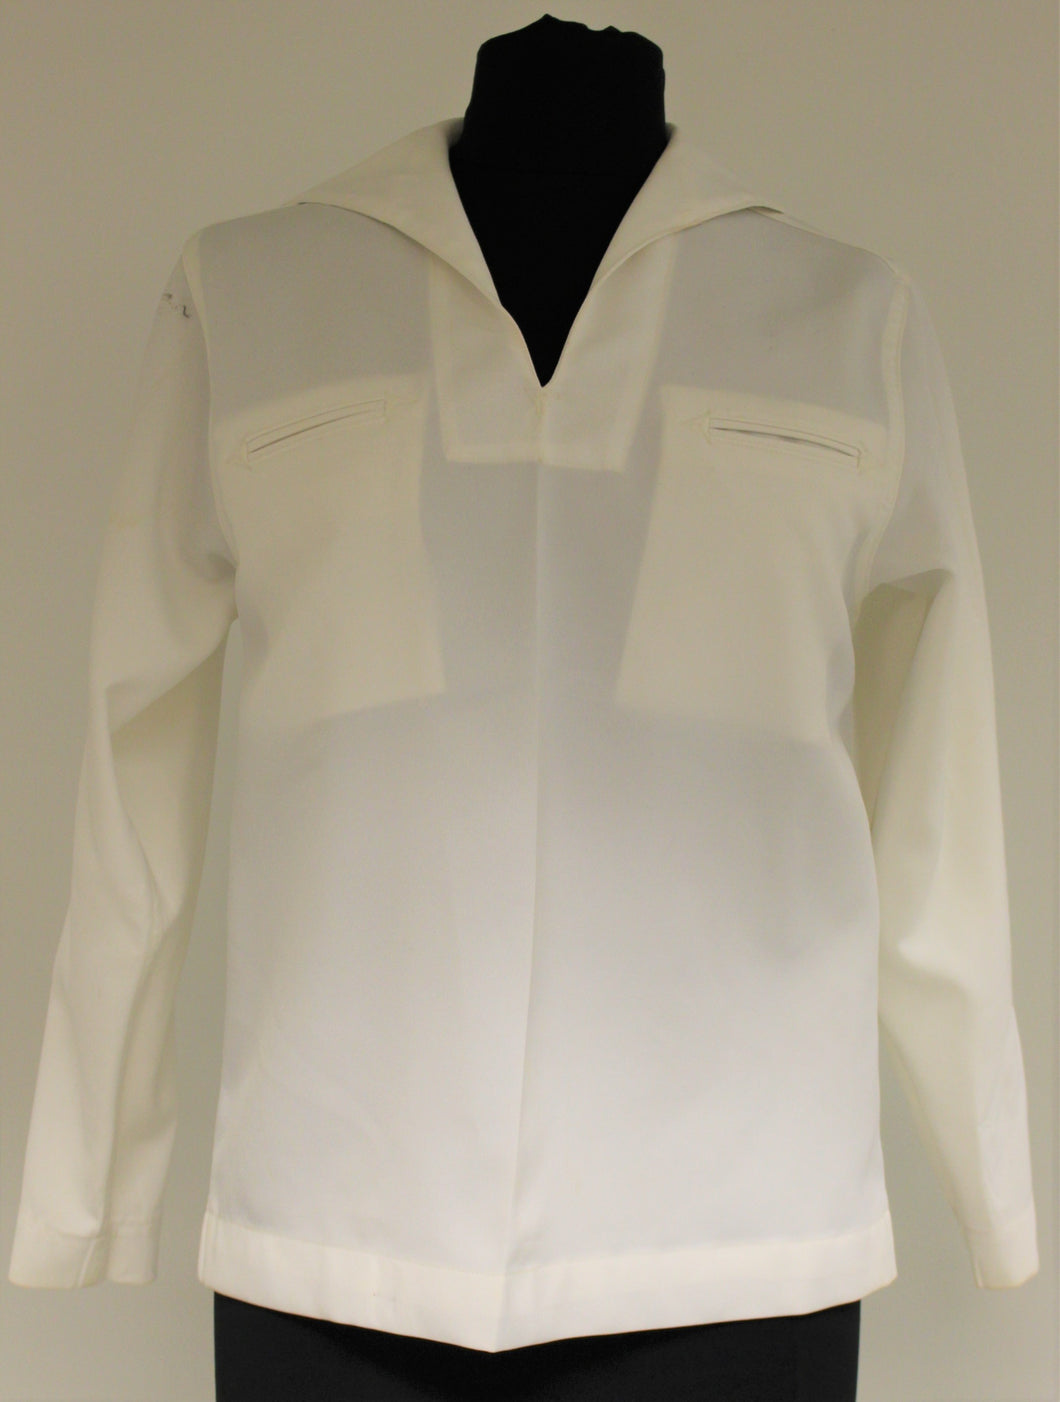 US Navy Enlisted Women's White Jumper Top, 8410-01-312-1453, Size: 14MT